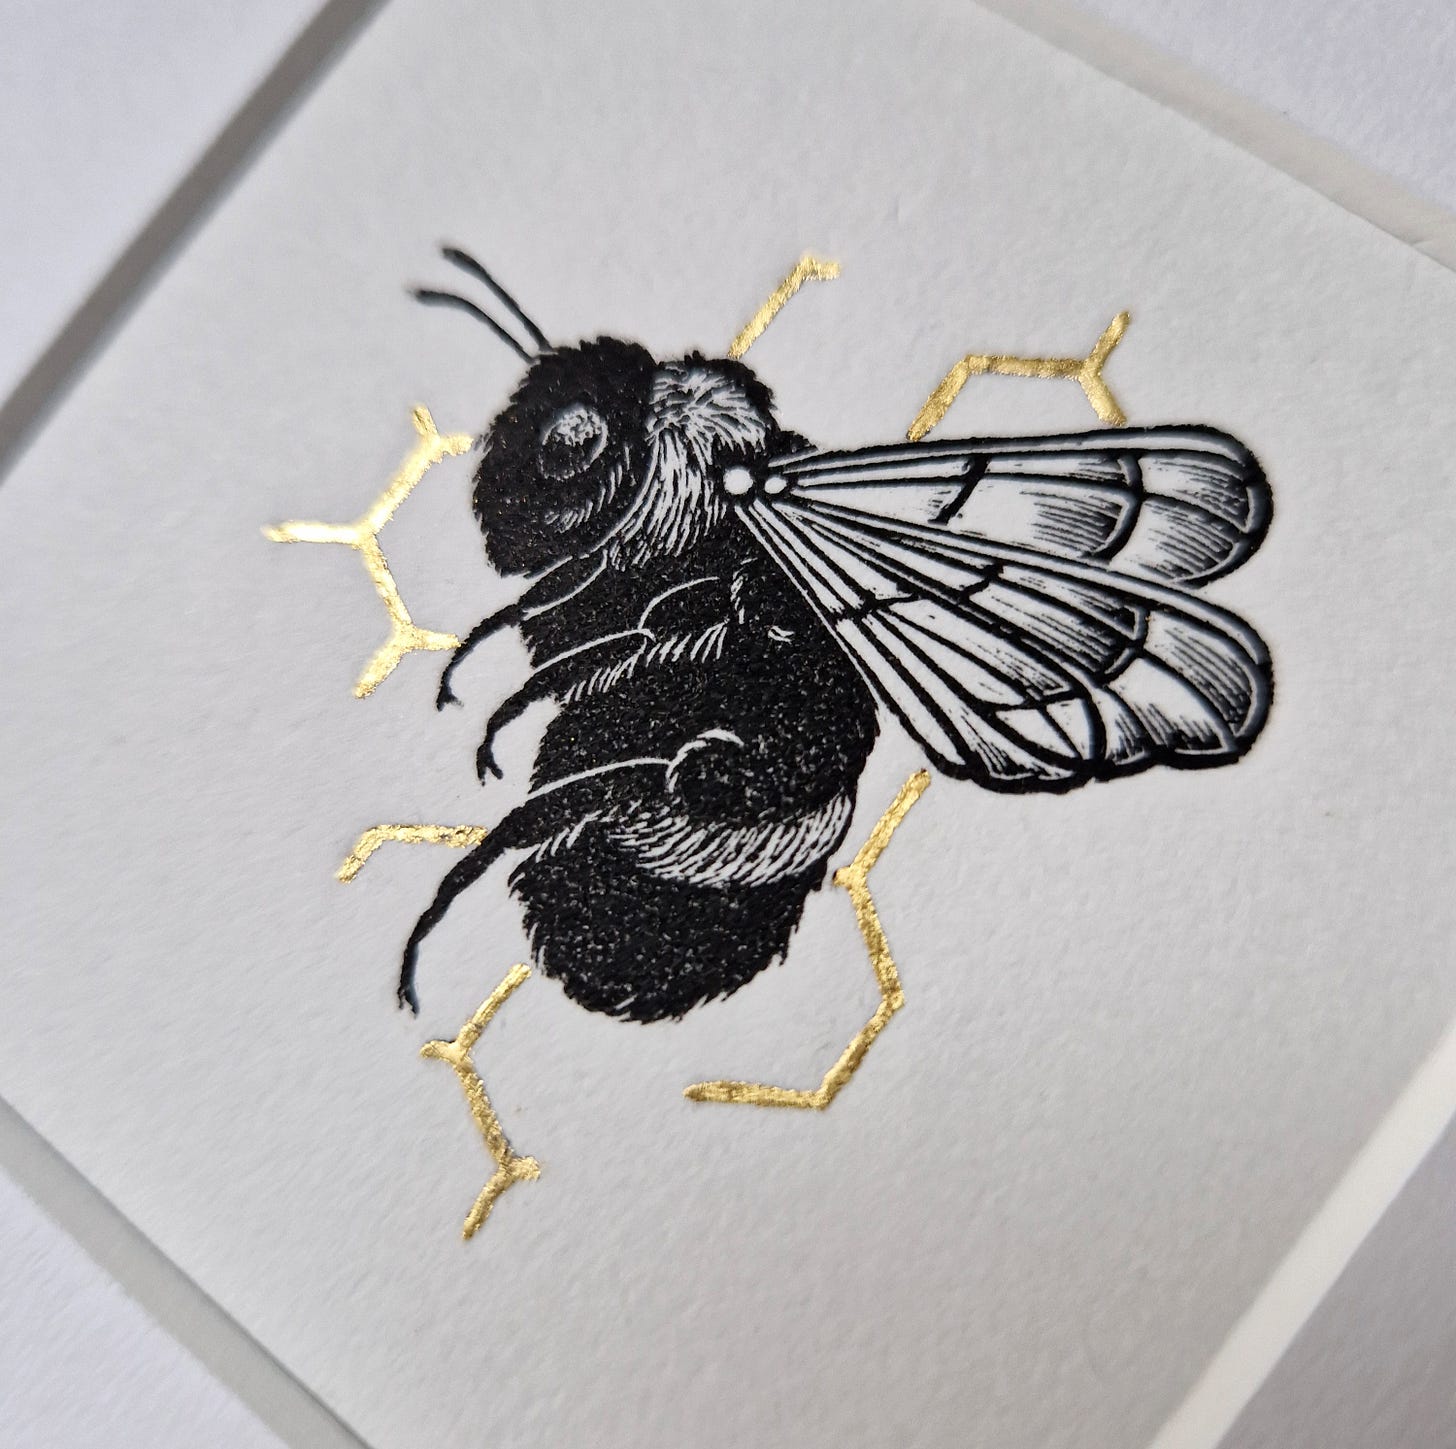 Bumblebee on Golden Honeycomb Wood Engraving. A solitary bee has been printed with black ink on warm white paper against a honeycomb line pattern that has been created using gold leaf.